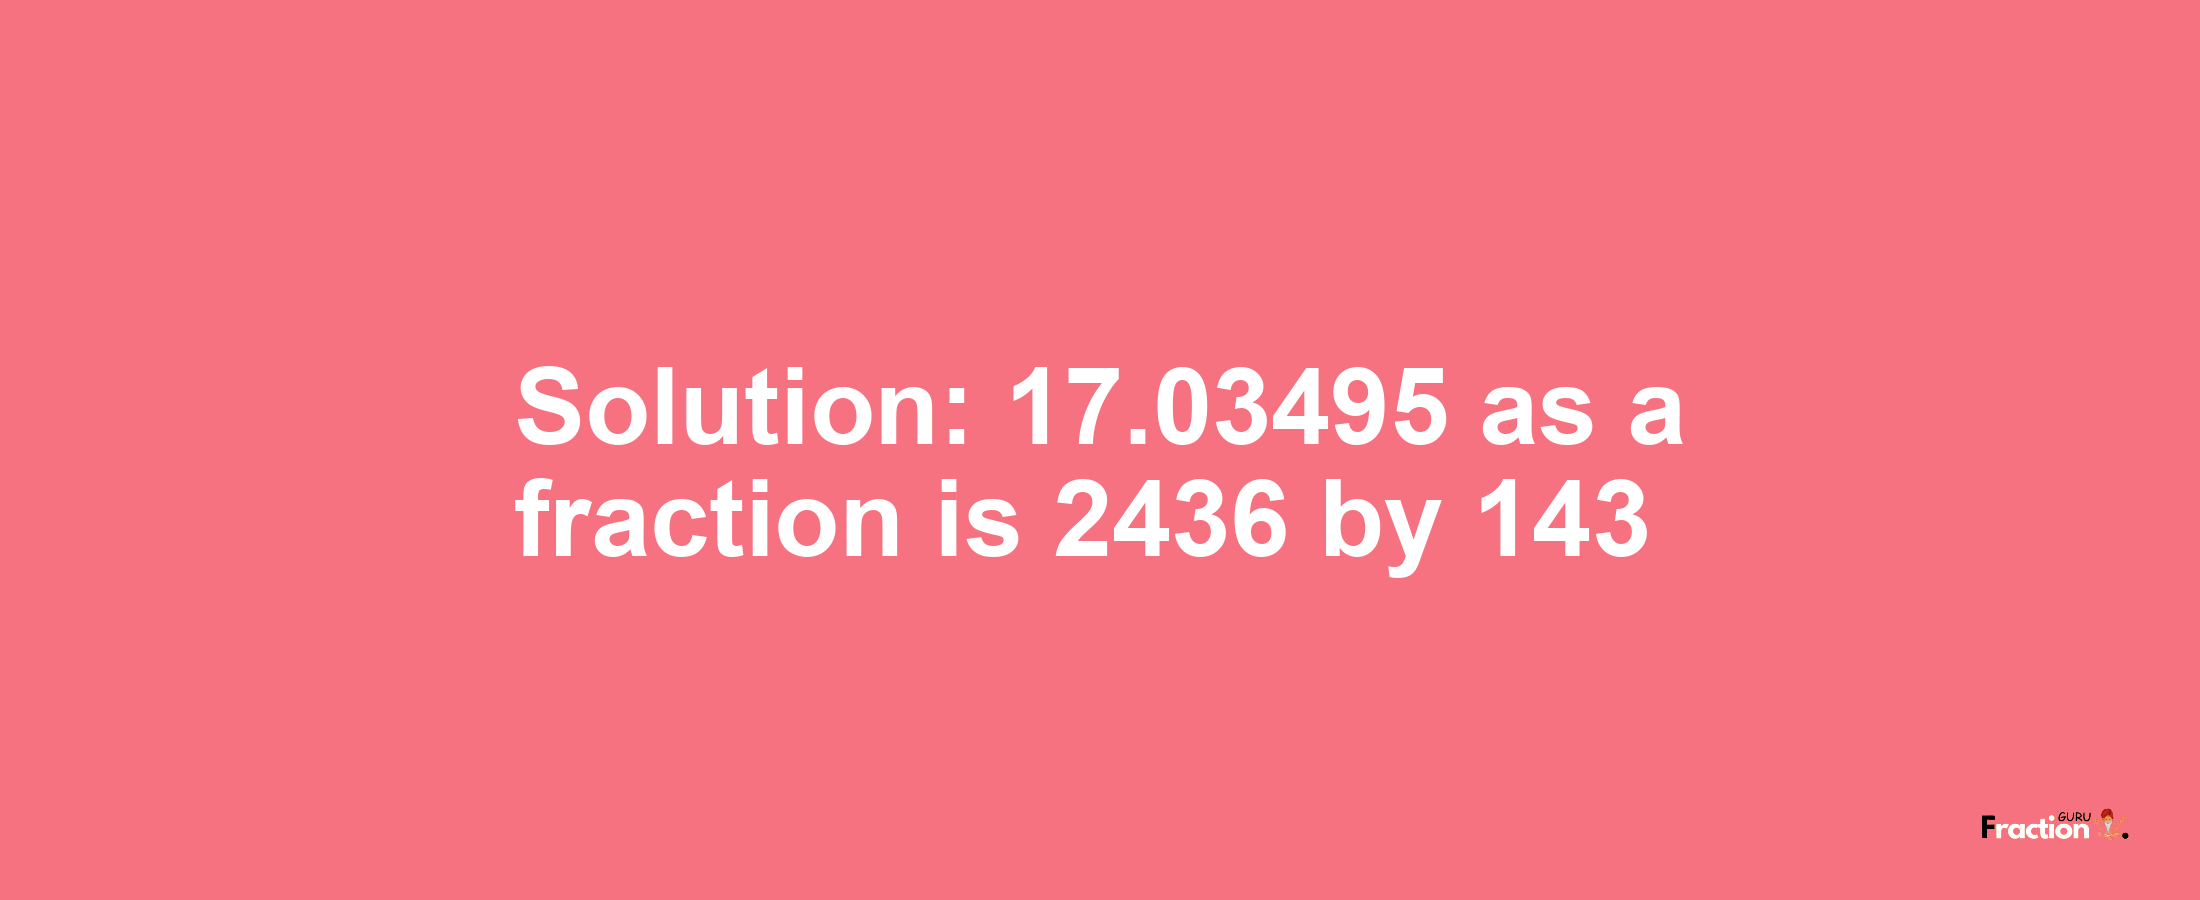 Solution:17.03495 as a fraction is 2436/143